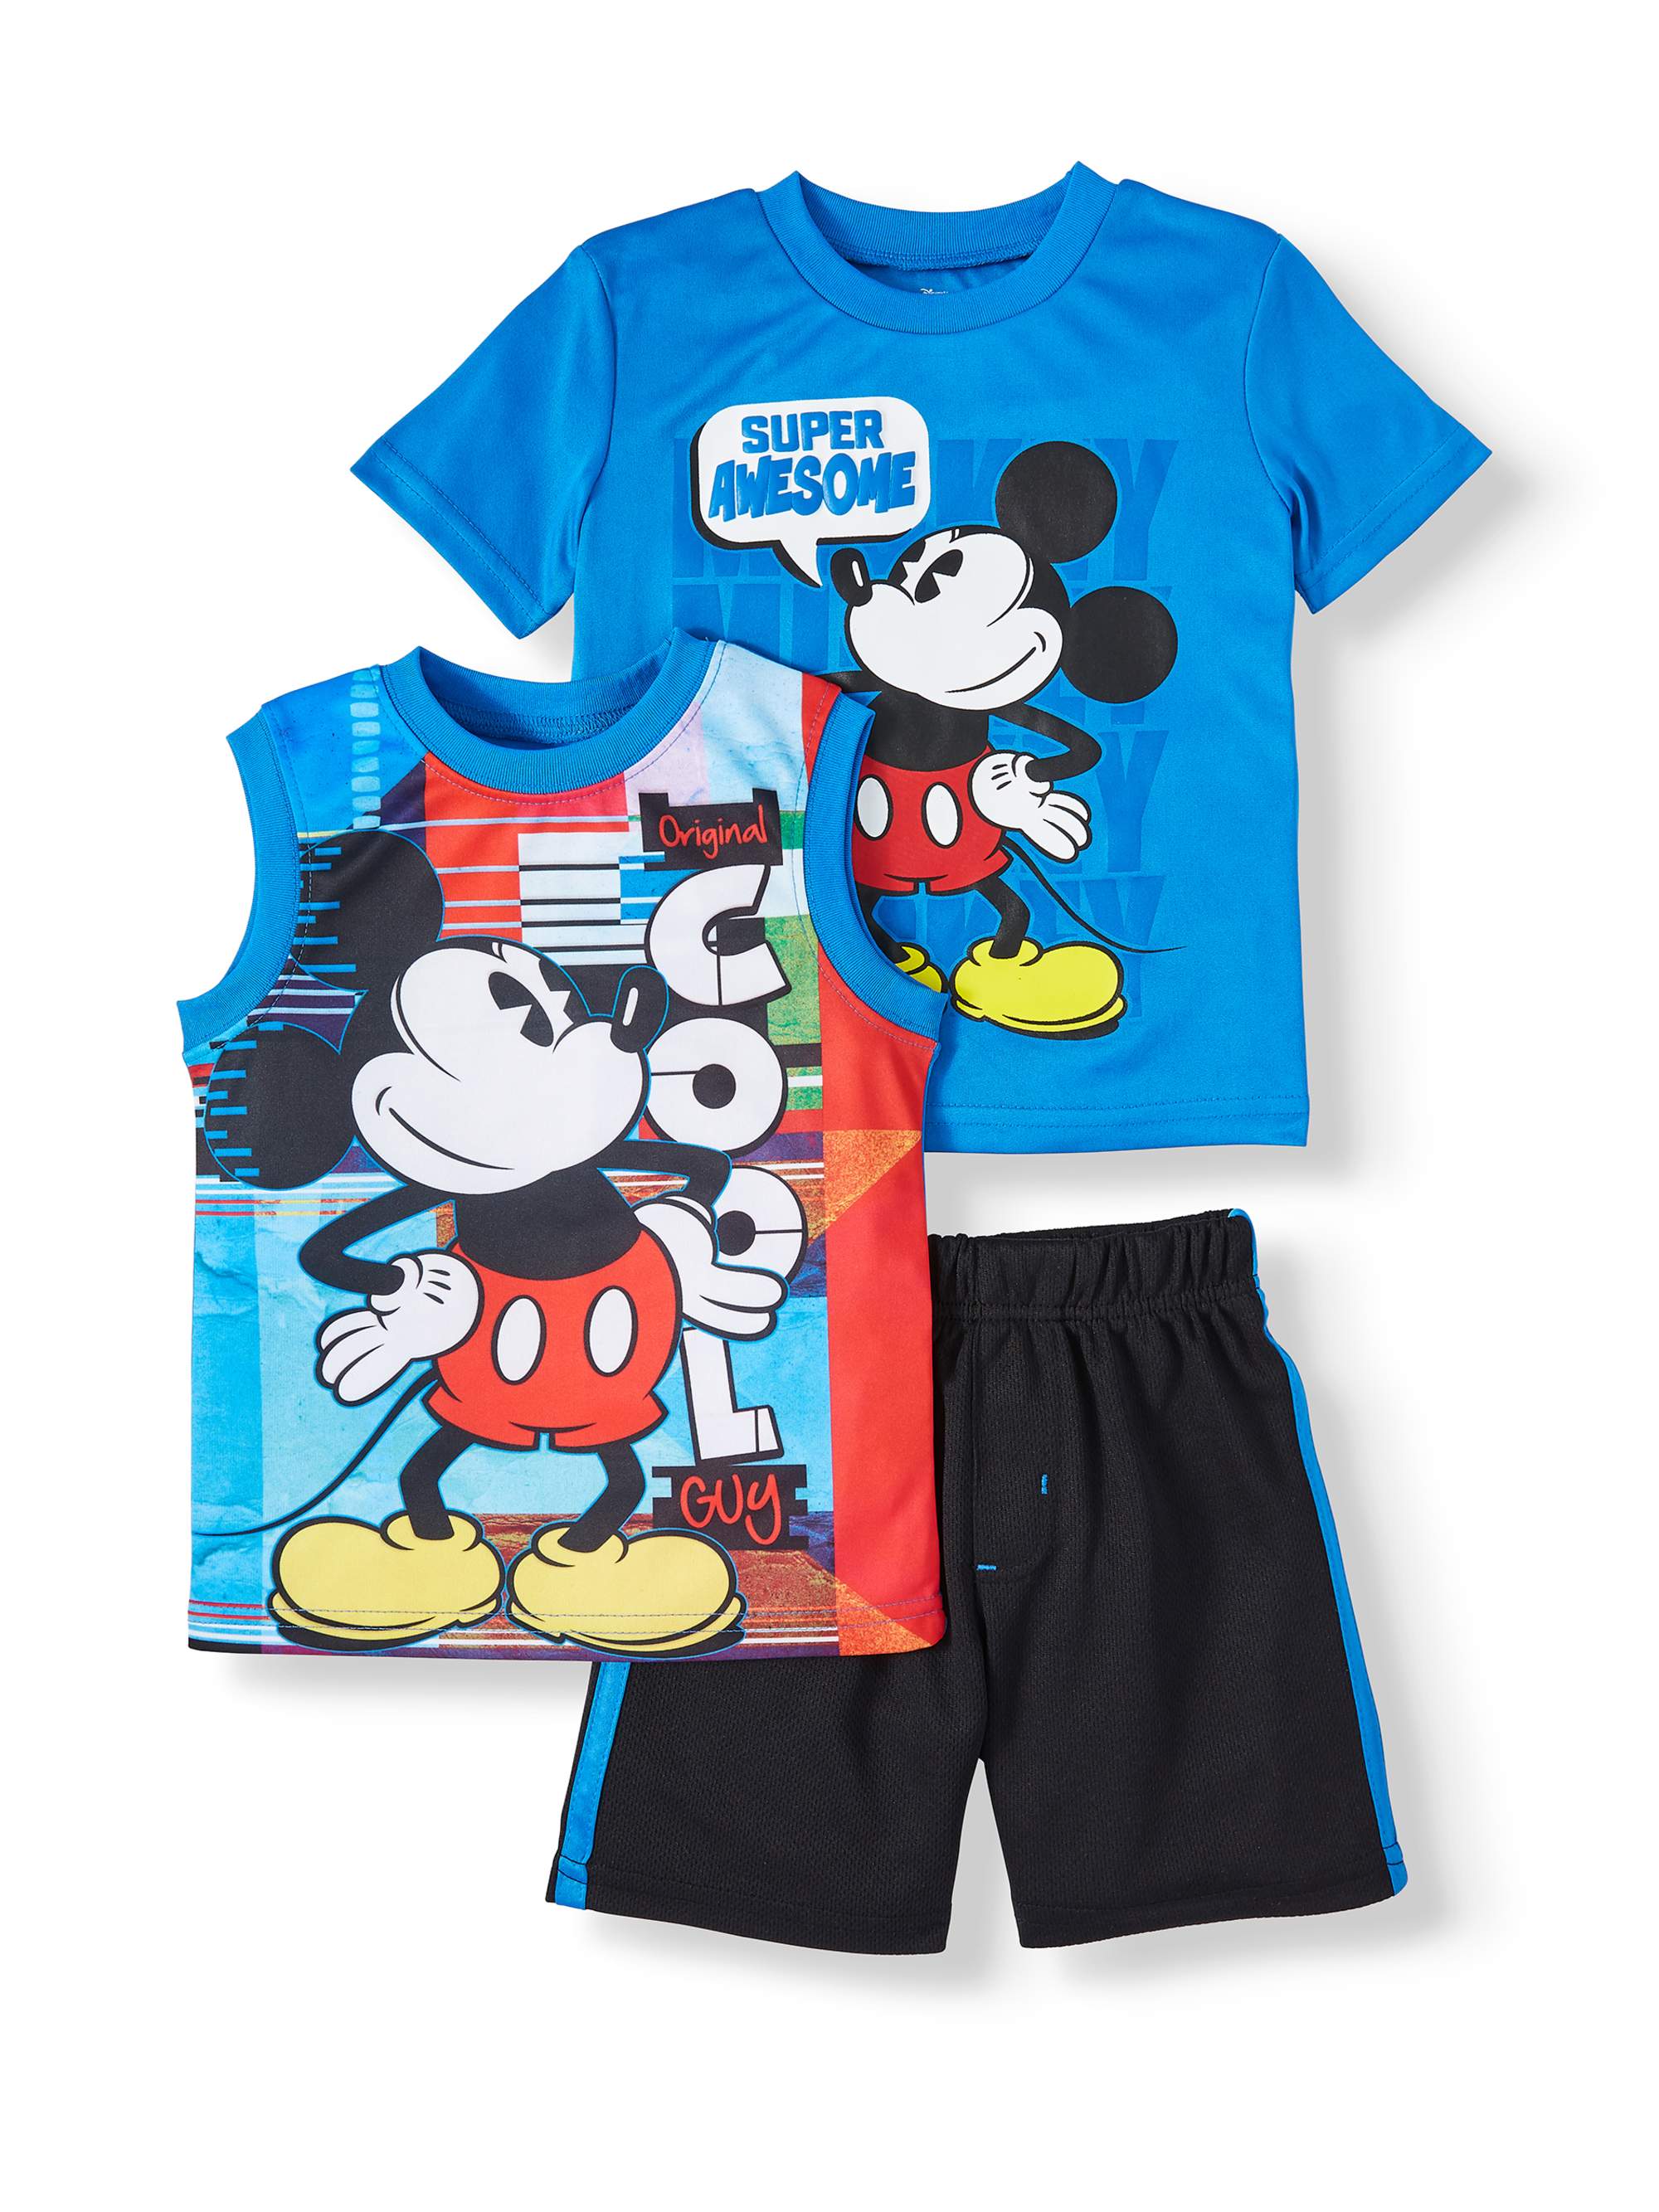 Mickey Mouse Short Sleeve Graphic T-shirt, Graphic Tank Top & Mesh Short, 3pc Outfit Set (Toddler Boys) - image 1 of 2